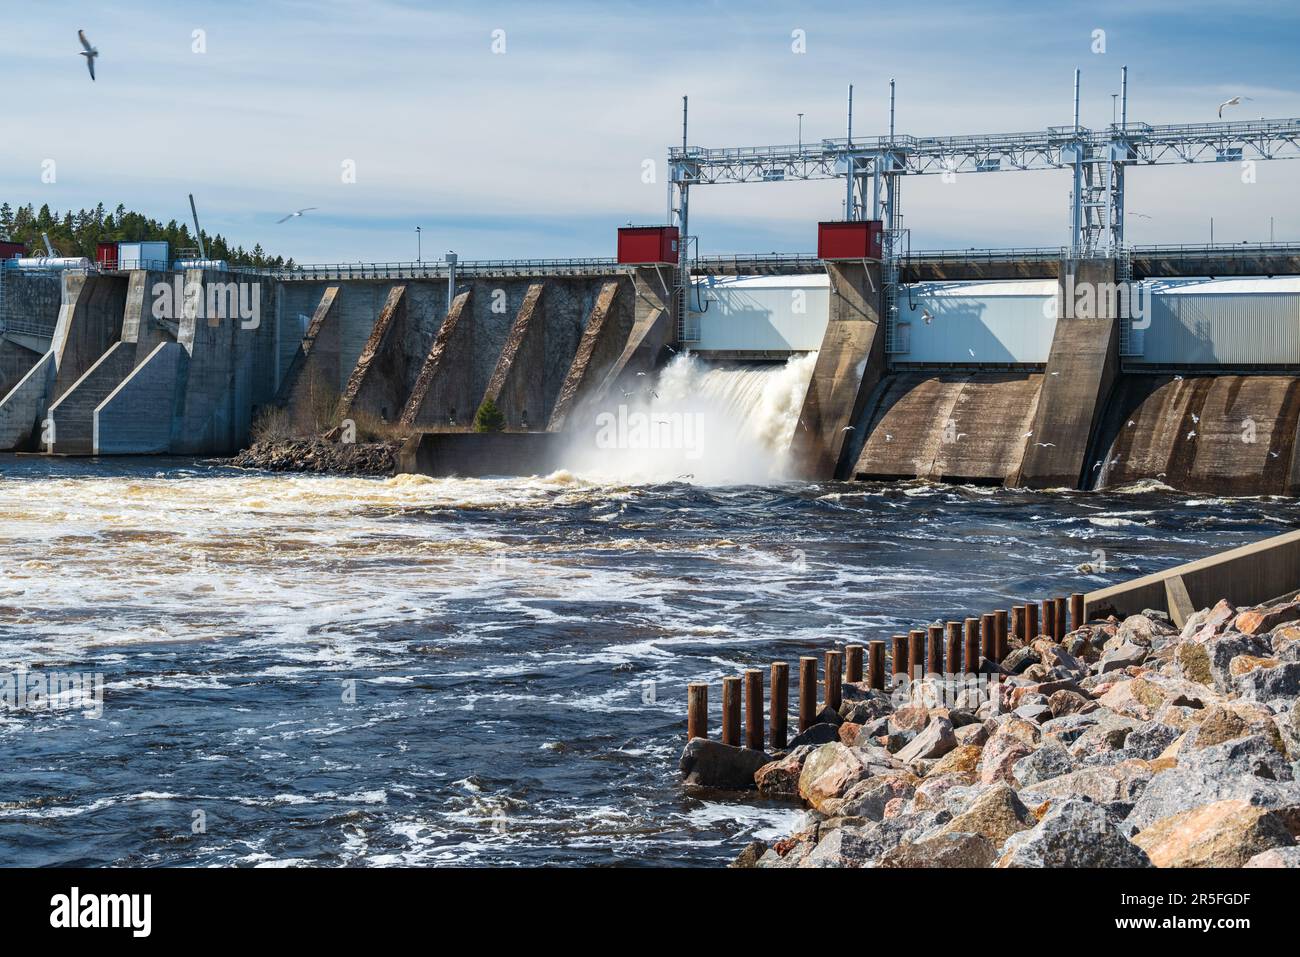 A hydropower plant releases excess water and seagulls search for food in the flowing water, image from the Ljusne strömmar power plant in Söderhamn mu Stock Photo